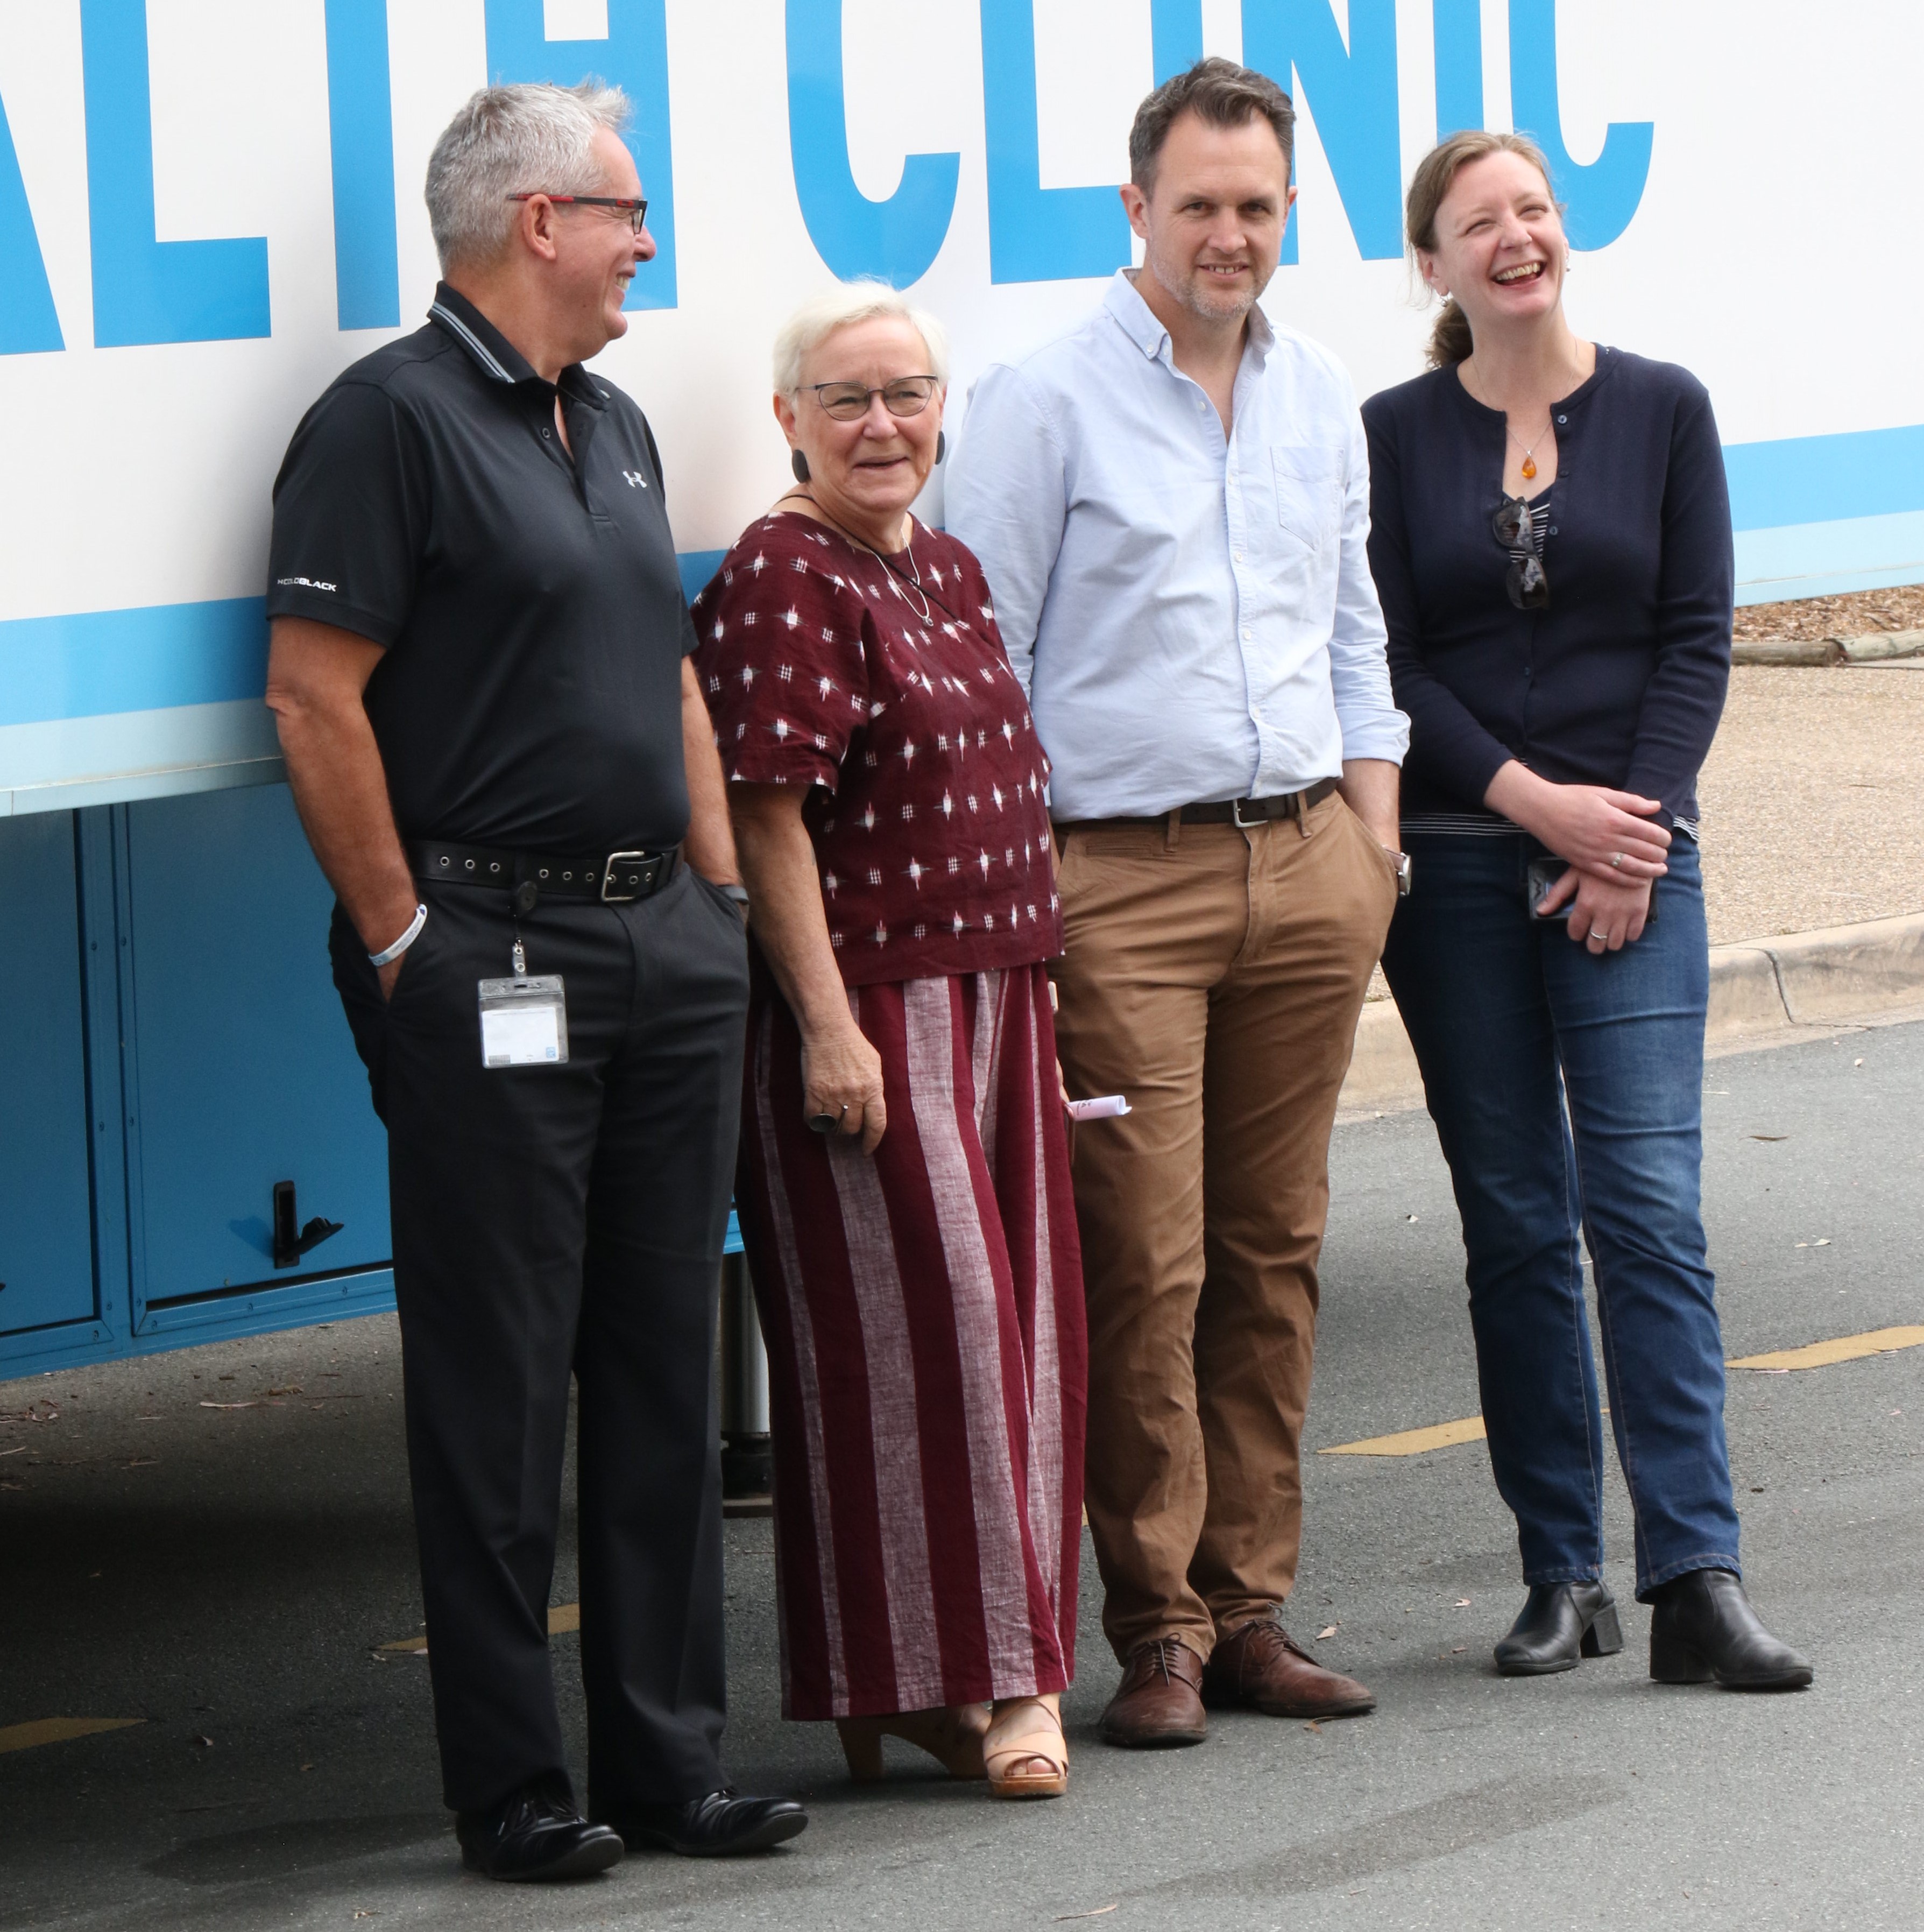 Some of the CARHI team members heading to Condobolin this weekend (L-R): Mr Ian Drayton, Dr Jordan Williams, Dr Dean Buckmaster and Dr Kate Holland.